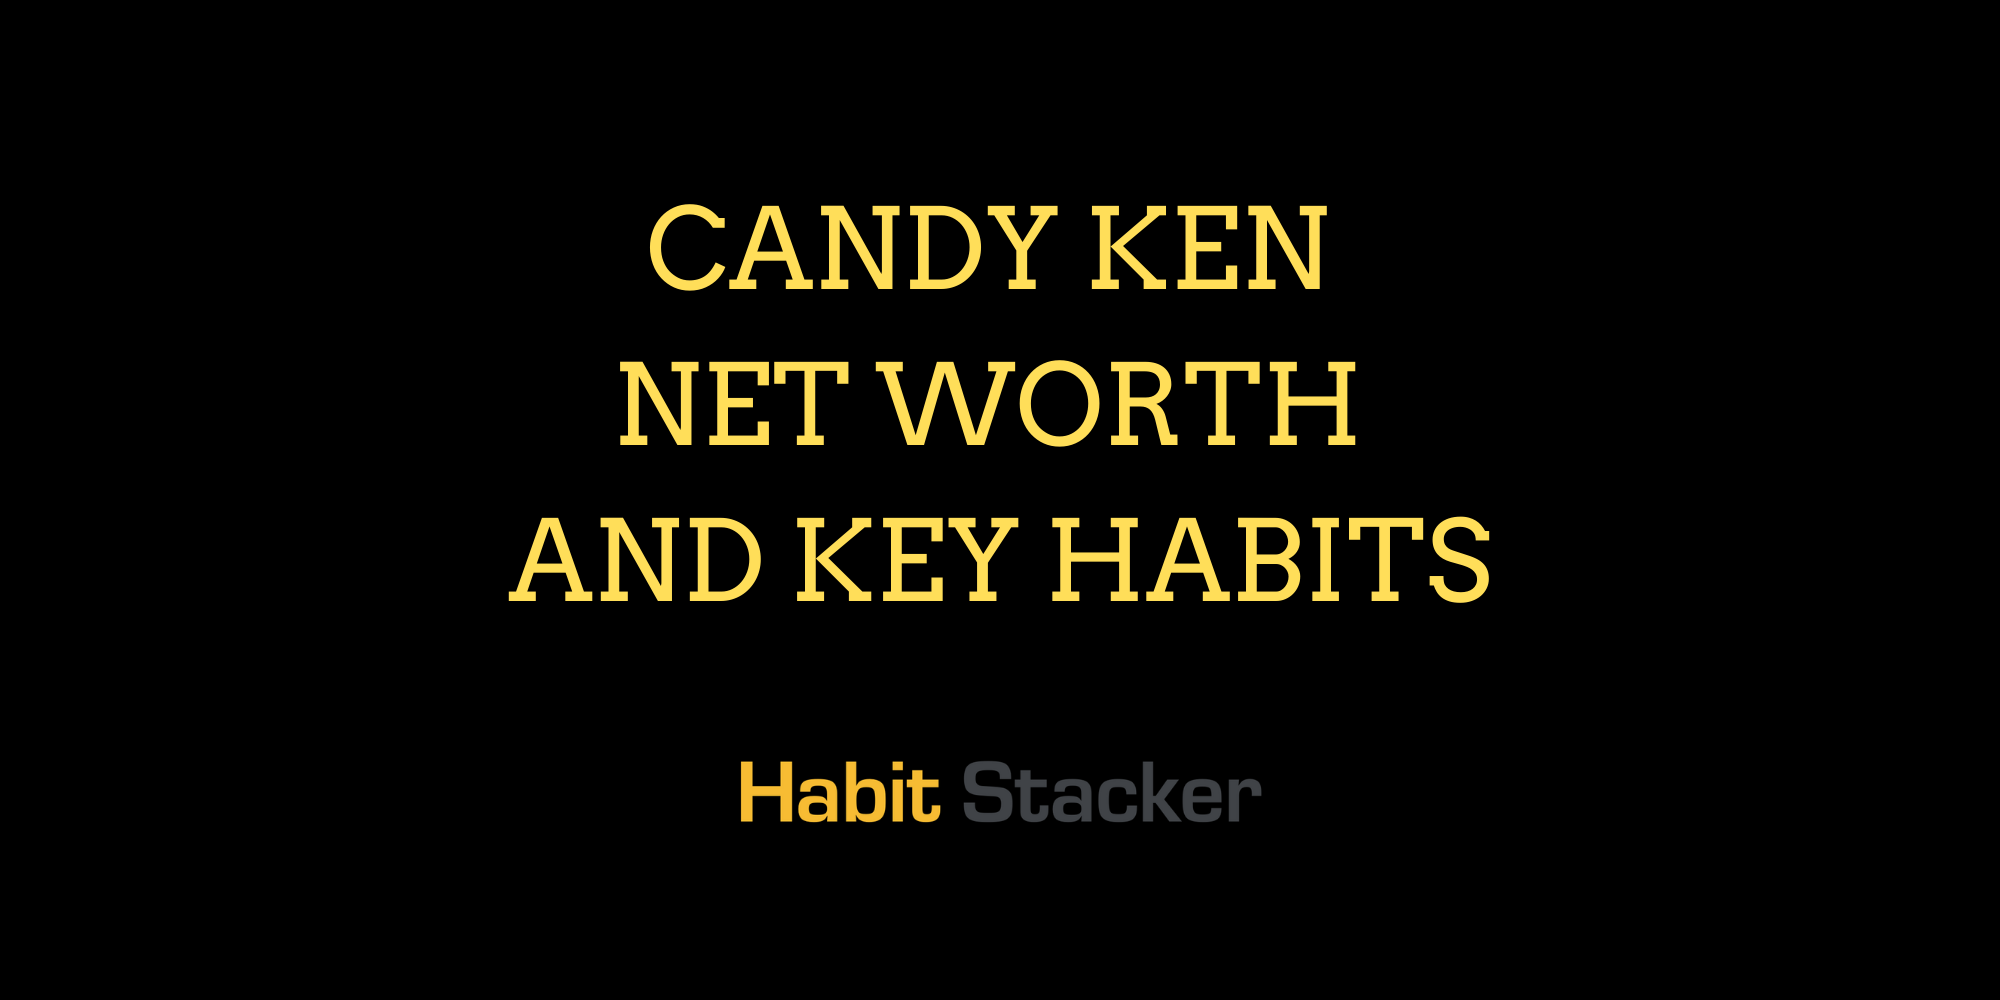 Candy Ken Net Worth and Key Habits